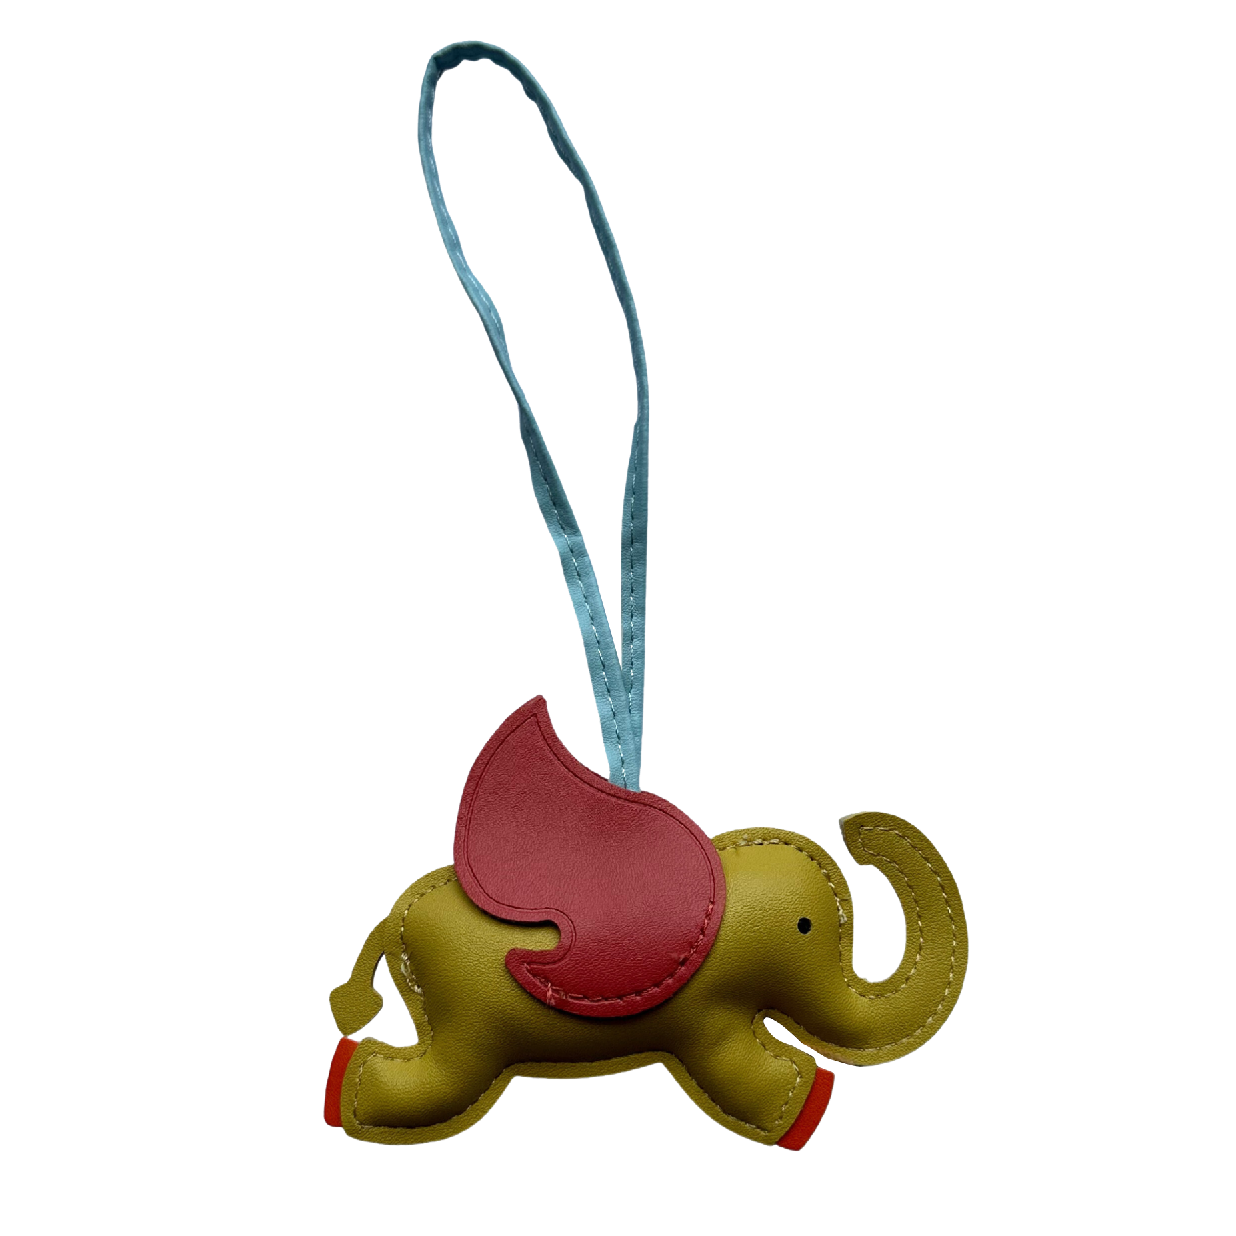 'Elefante Volante' Key Chain/ Bag Charm in Mustard and Red